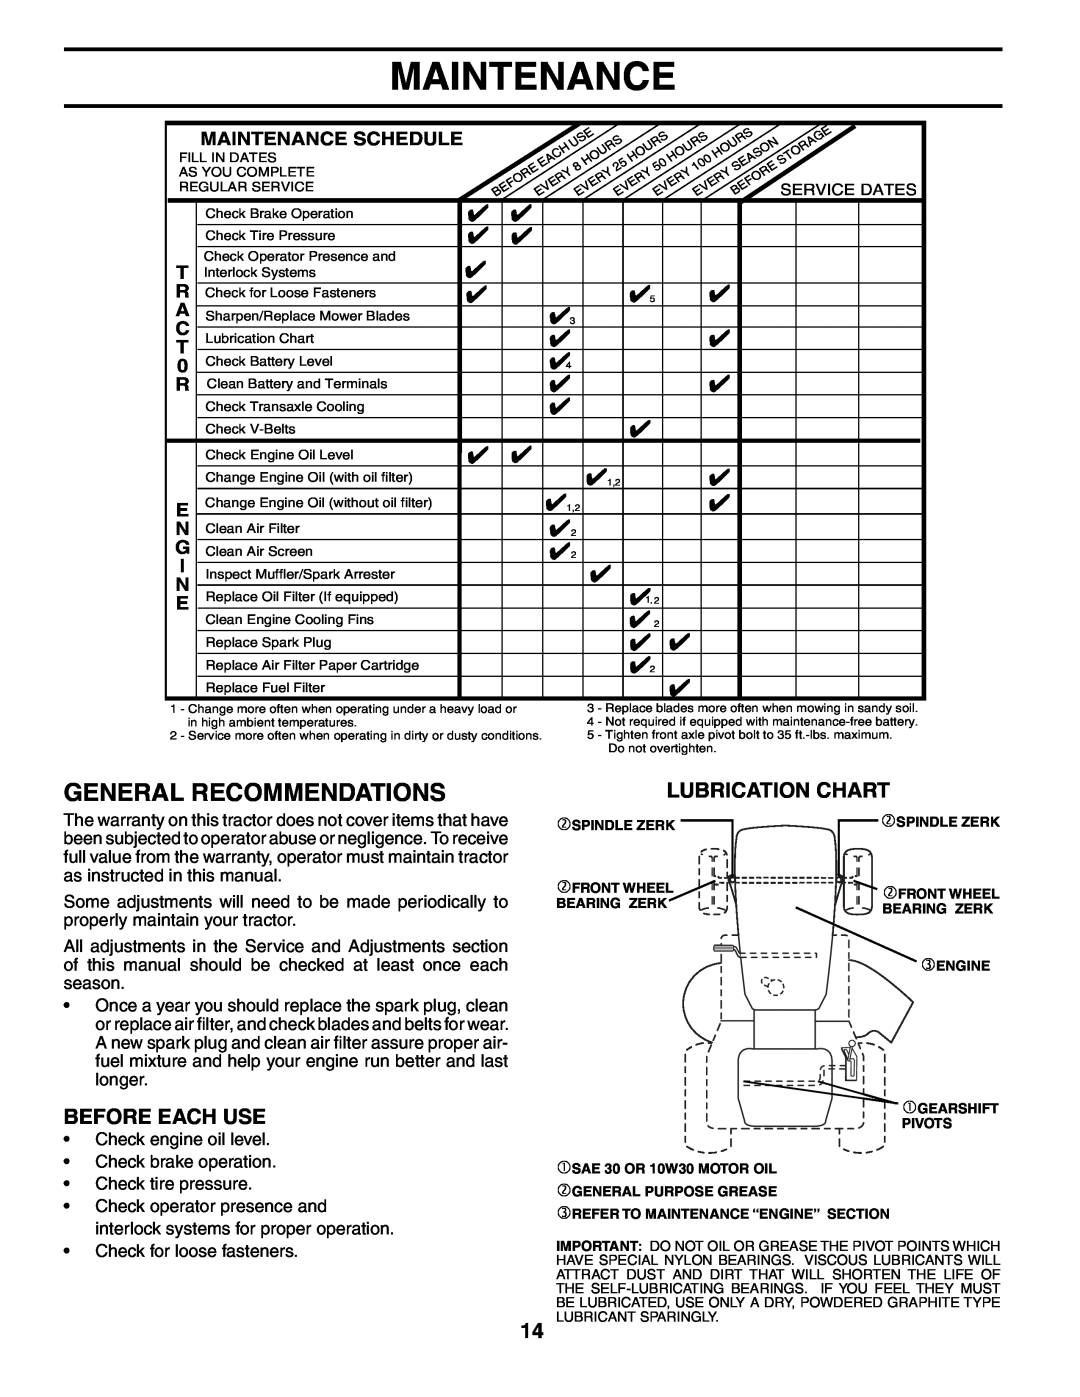 Poulan 954569554, 184518 manual Maintenance, General Recommendations, Before Each Use, Lubrication Chart 